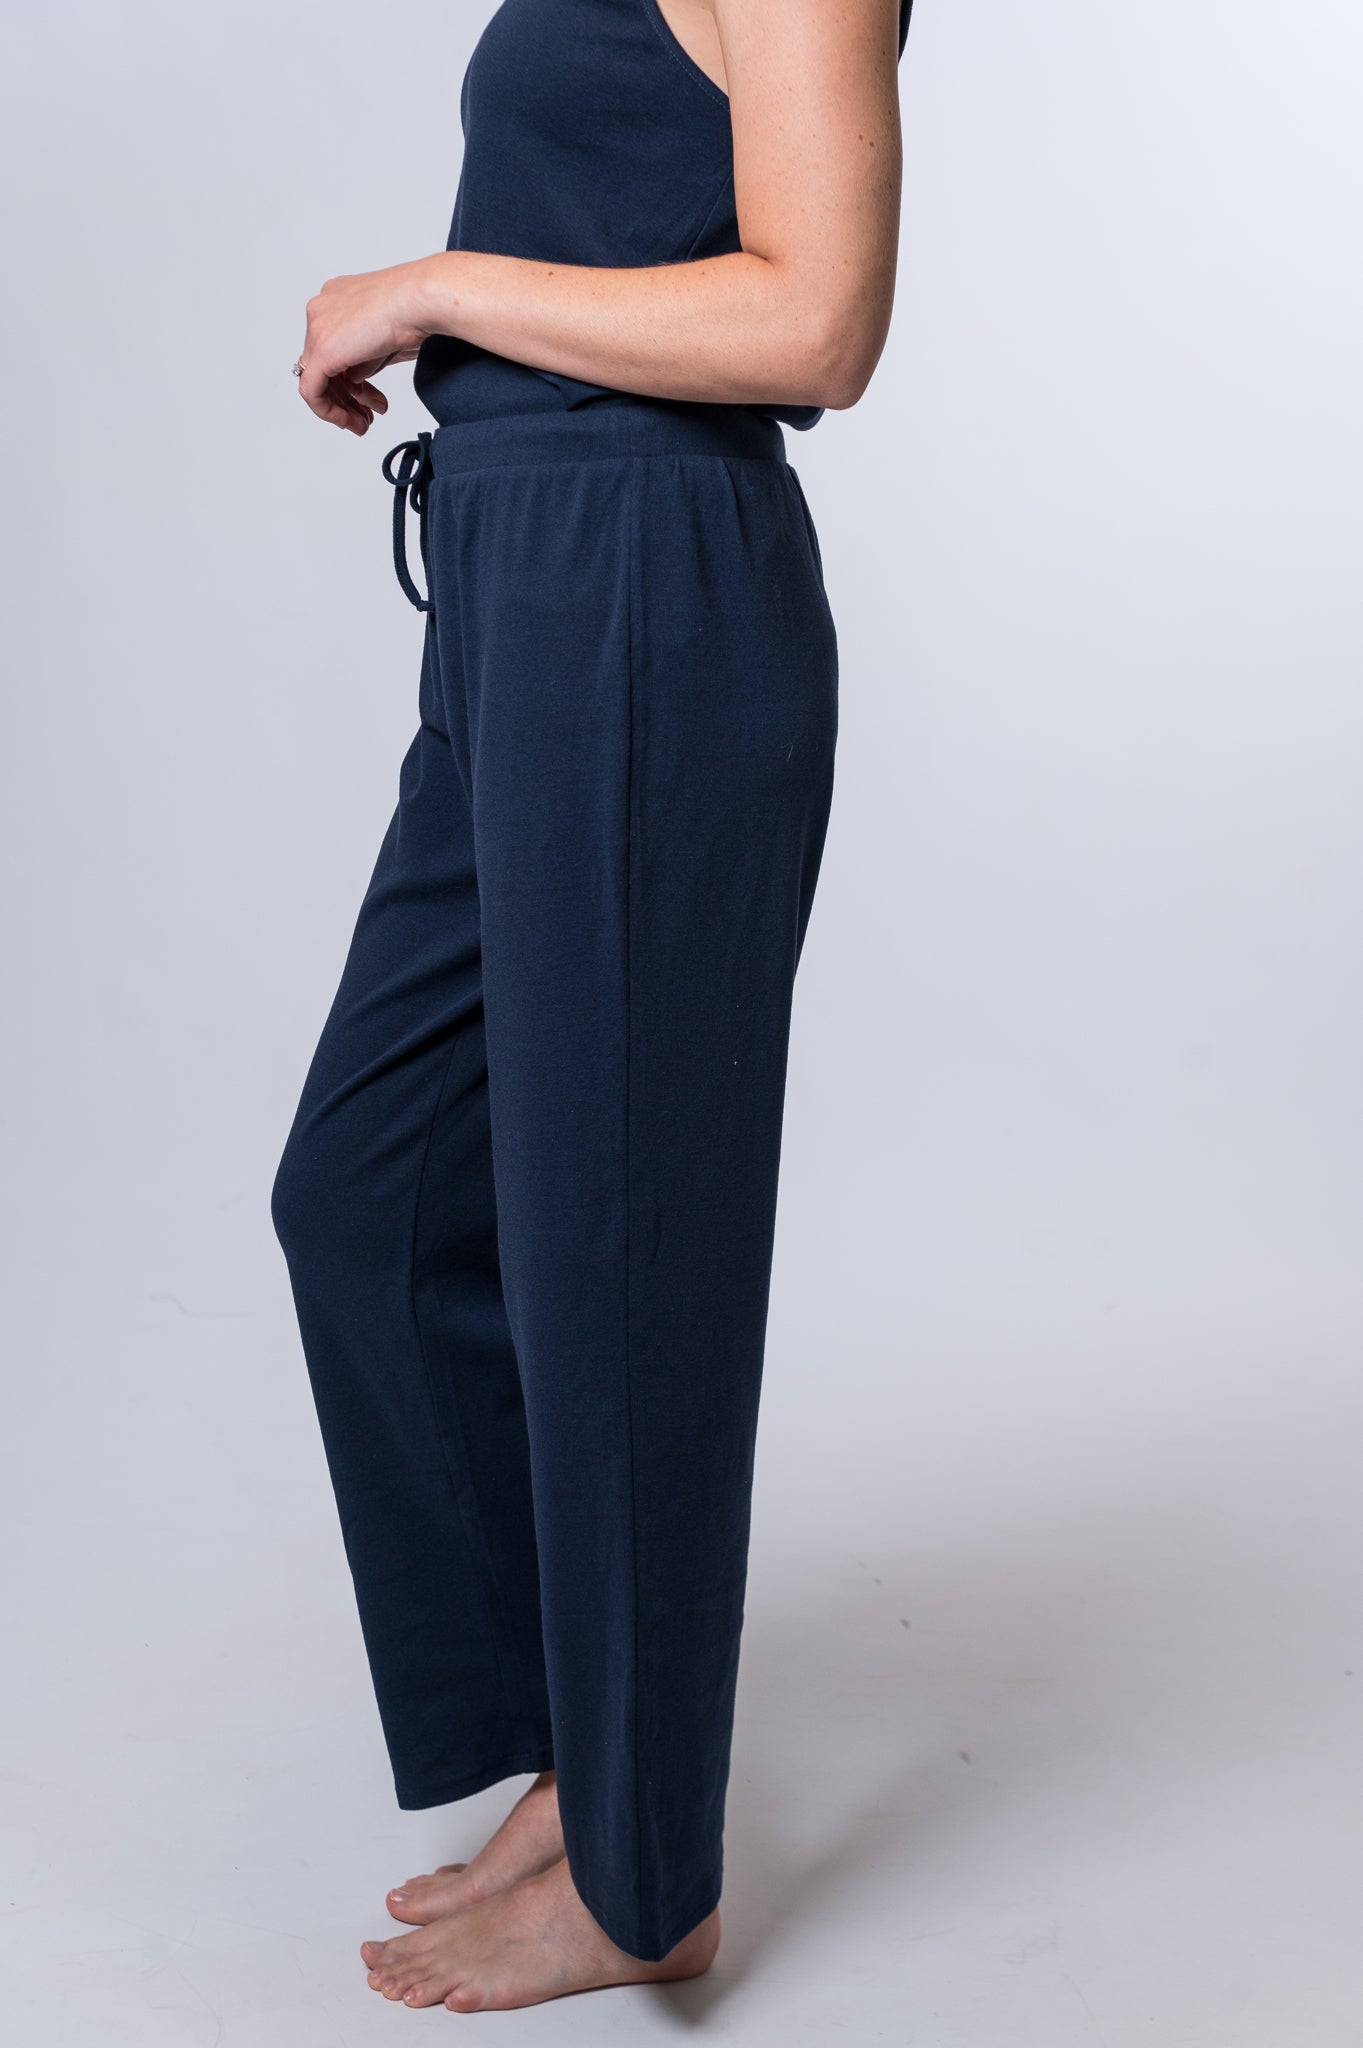 Woman wearing navy blue drawstring lounge pant and matching tank top. Side of clothing is being shown